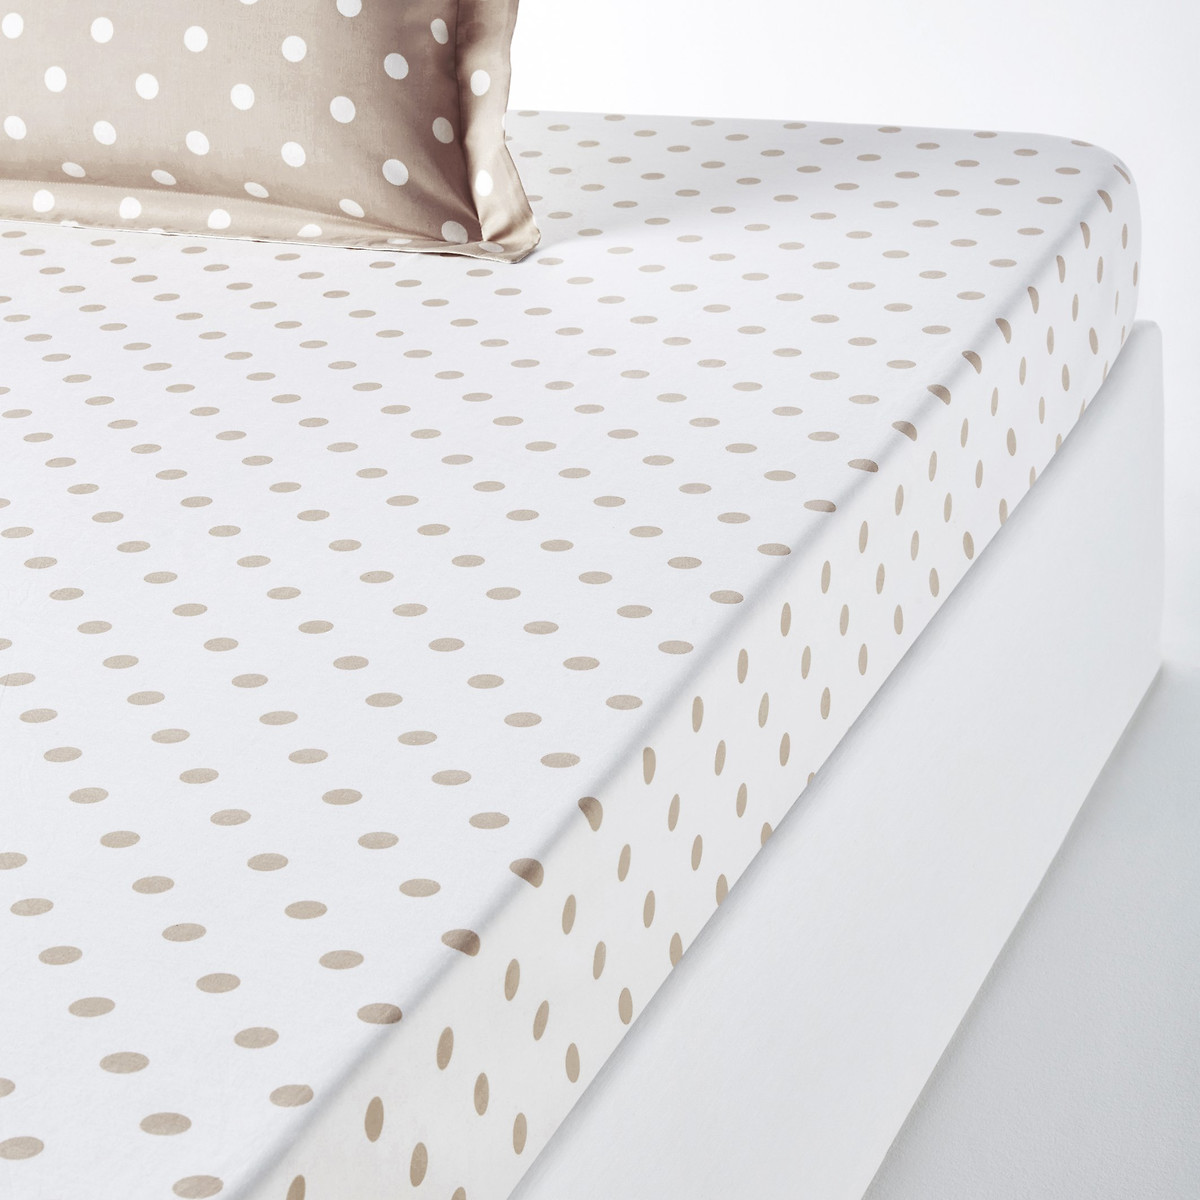 Clarisse Polka Dot 100% Cotton Fitted Sheet